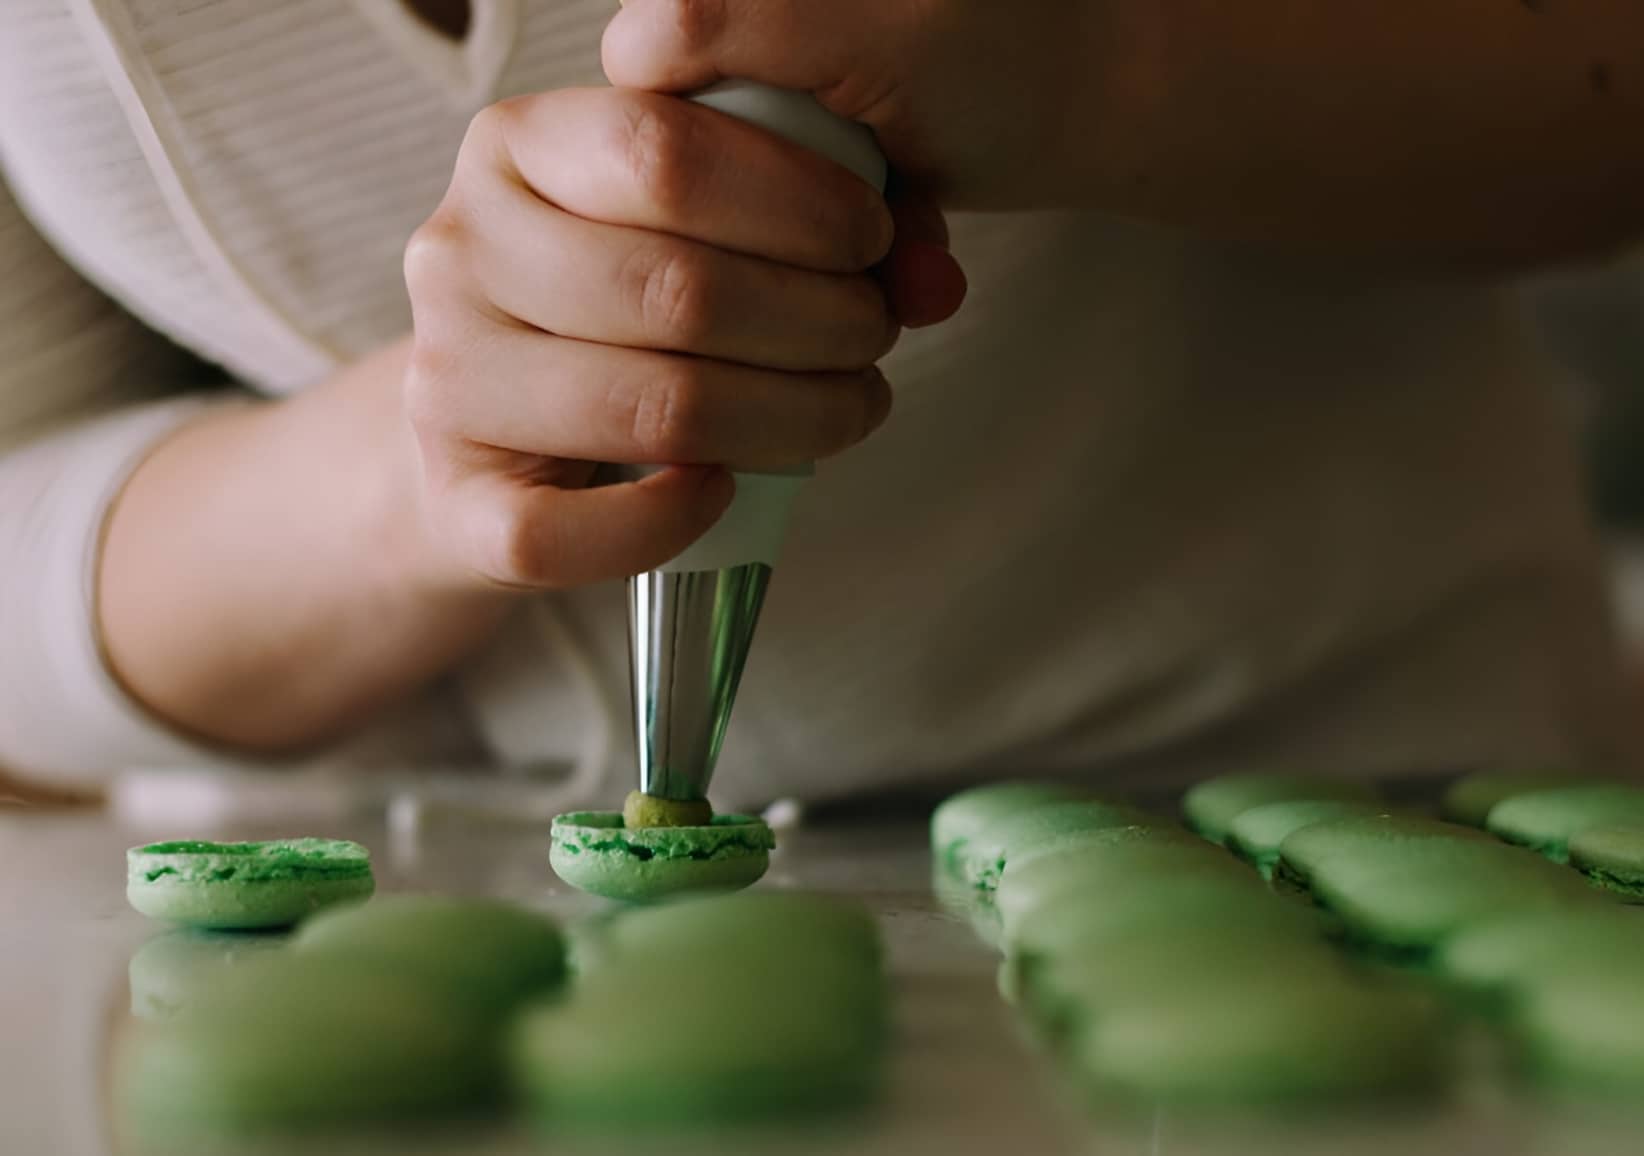 A close up shot of a woman's hands, using a piping bag to squeeze delicious green filling into rows of green macarons